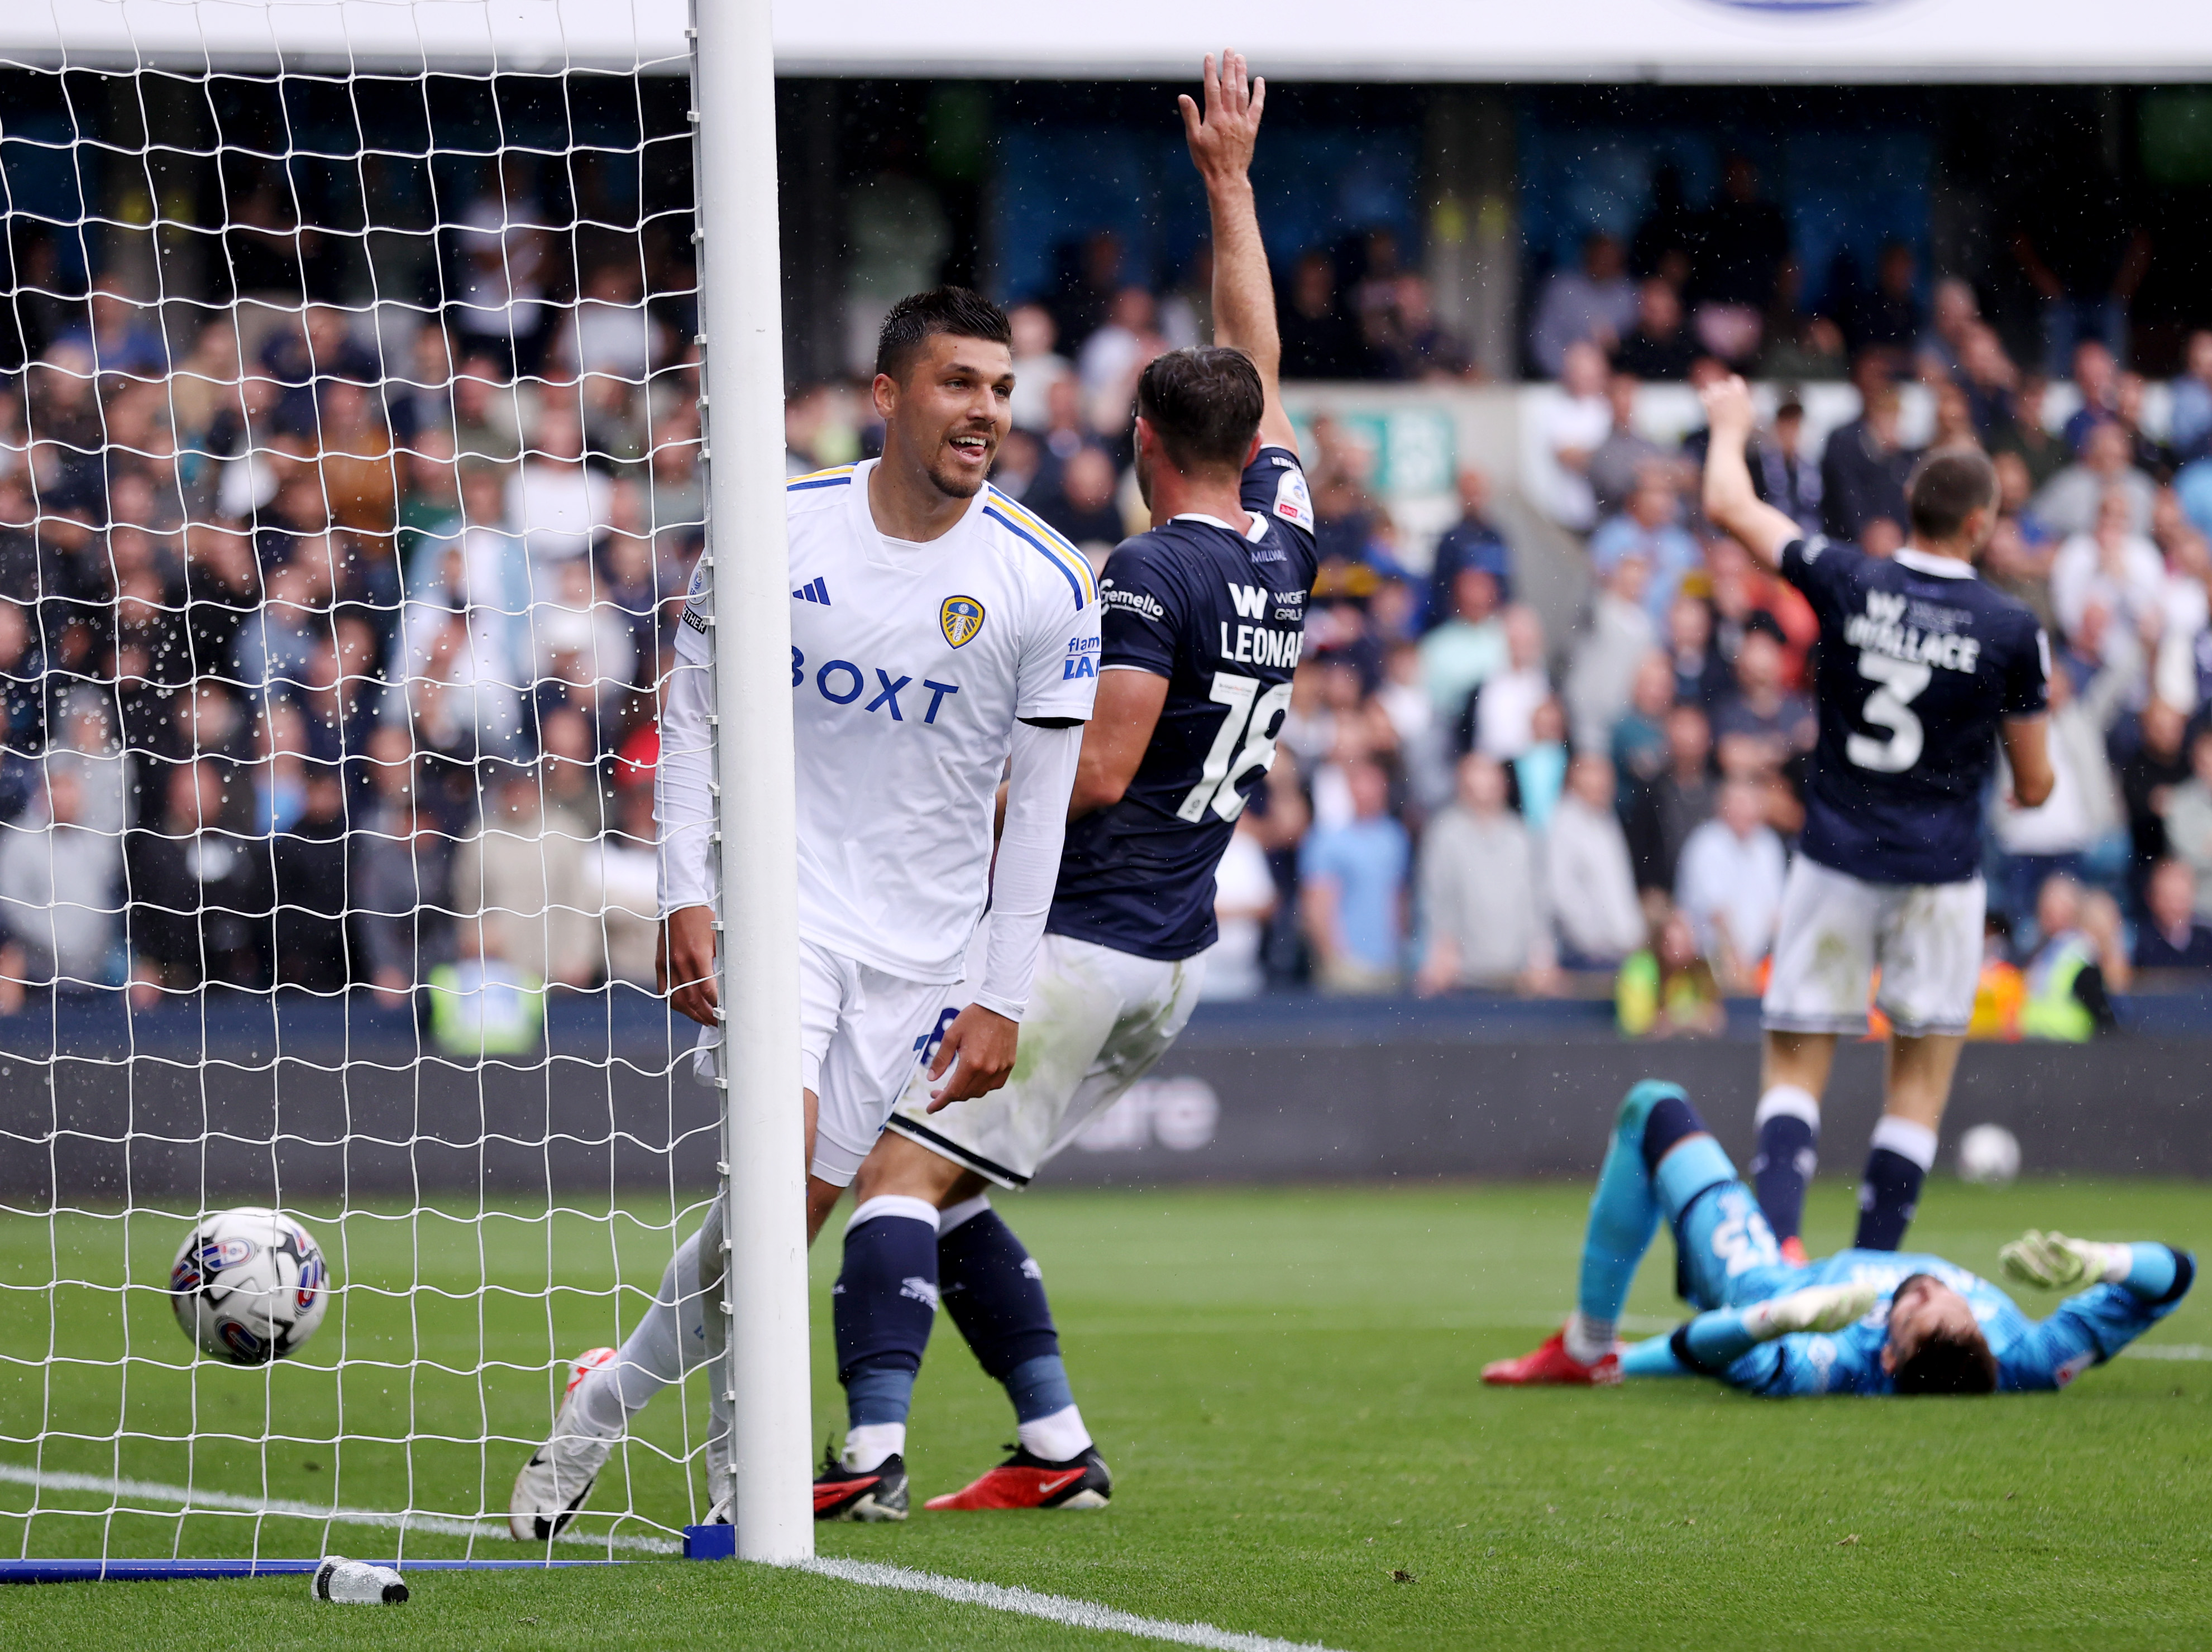 Millwall vs Leeds United live: Piroe finds the net in first half, goal and  score updates from The Den